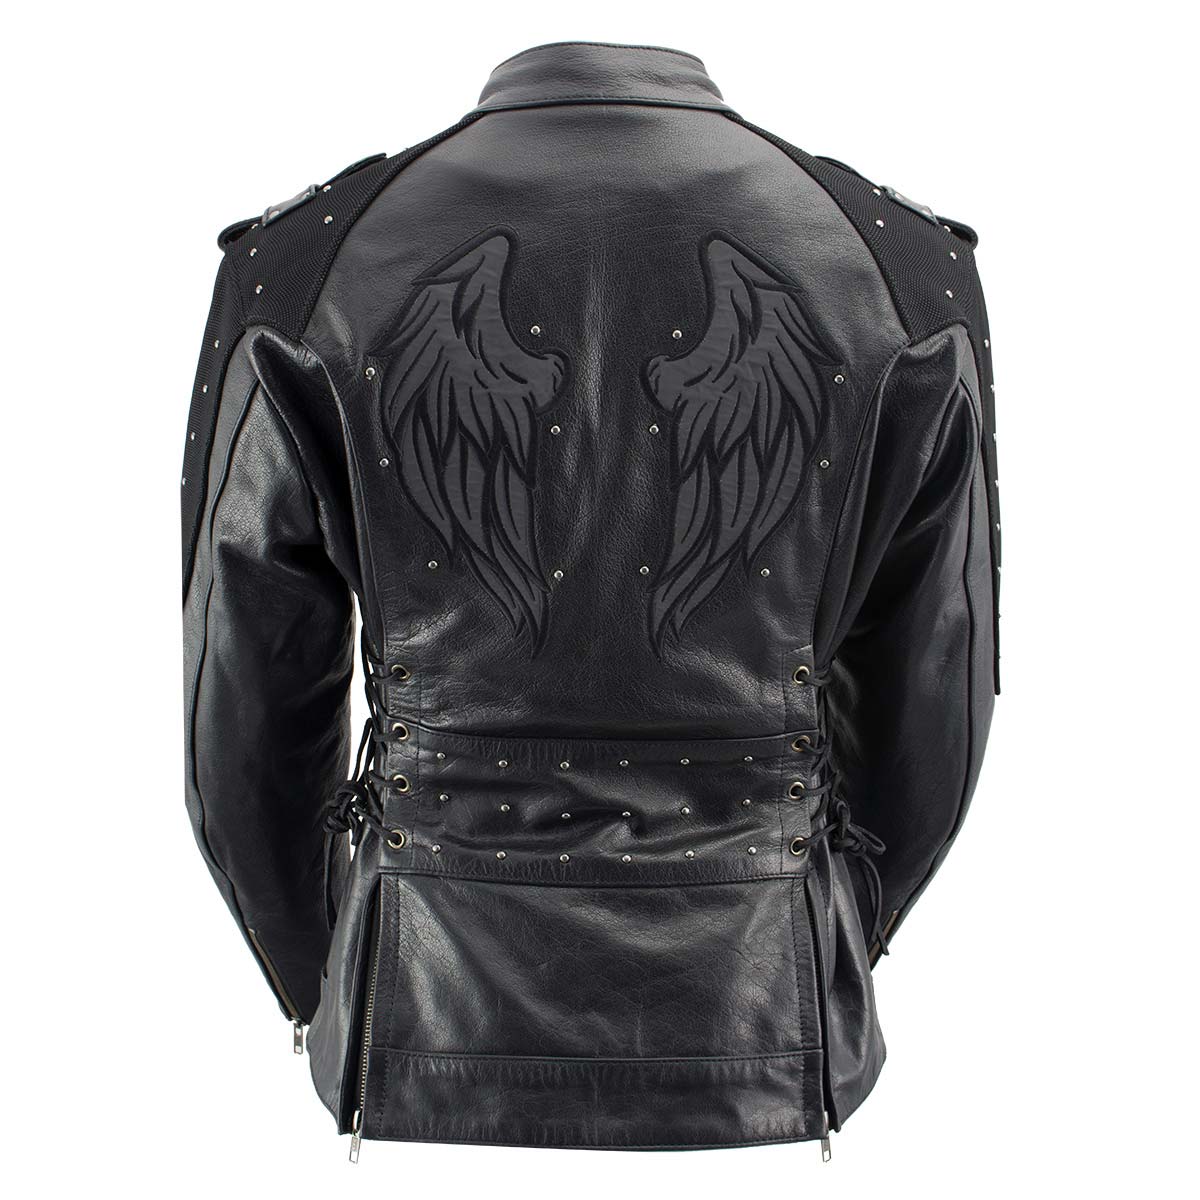 Xelement Women's Scuba Black Leather Motorcycle Biker Jacket with Reflective Wings and Studs XS22001